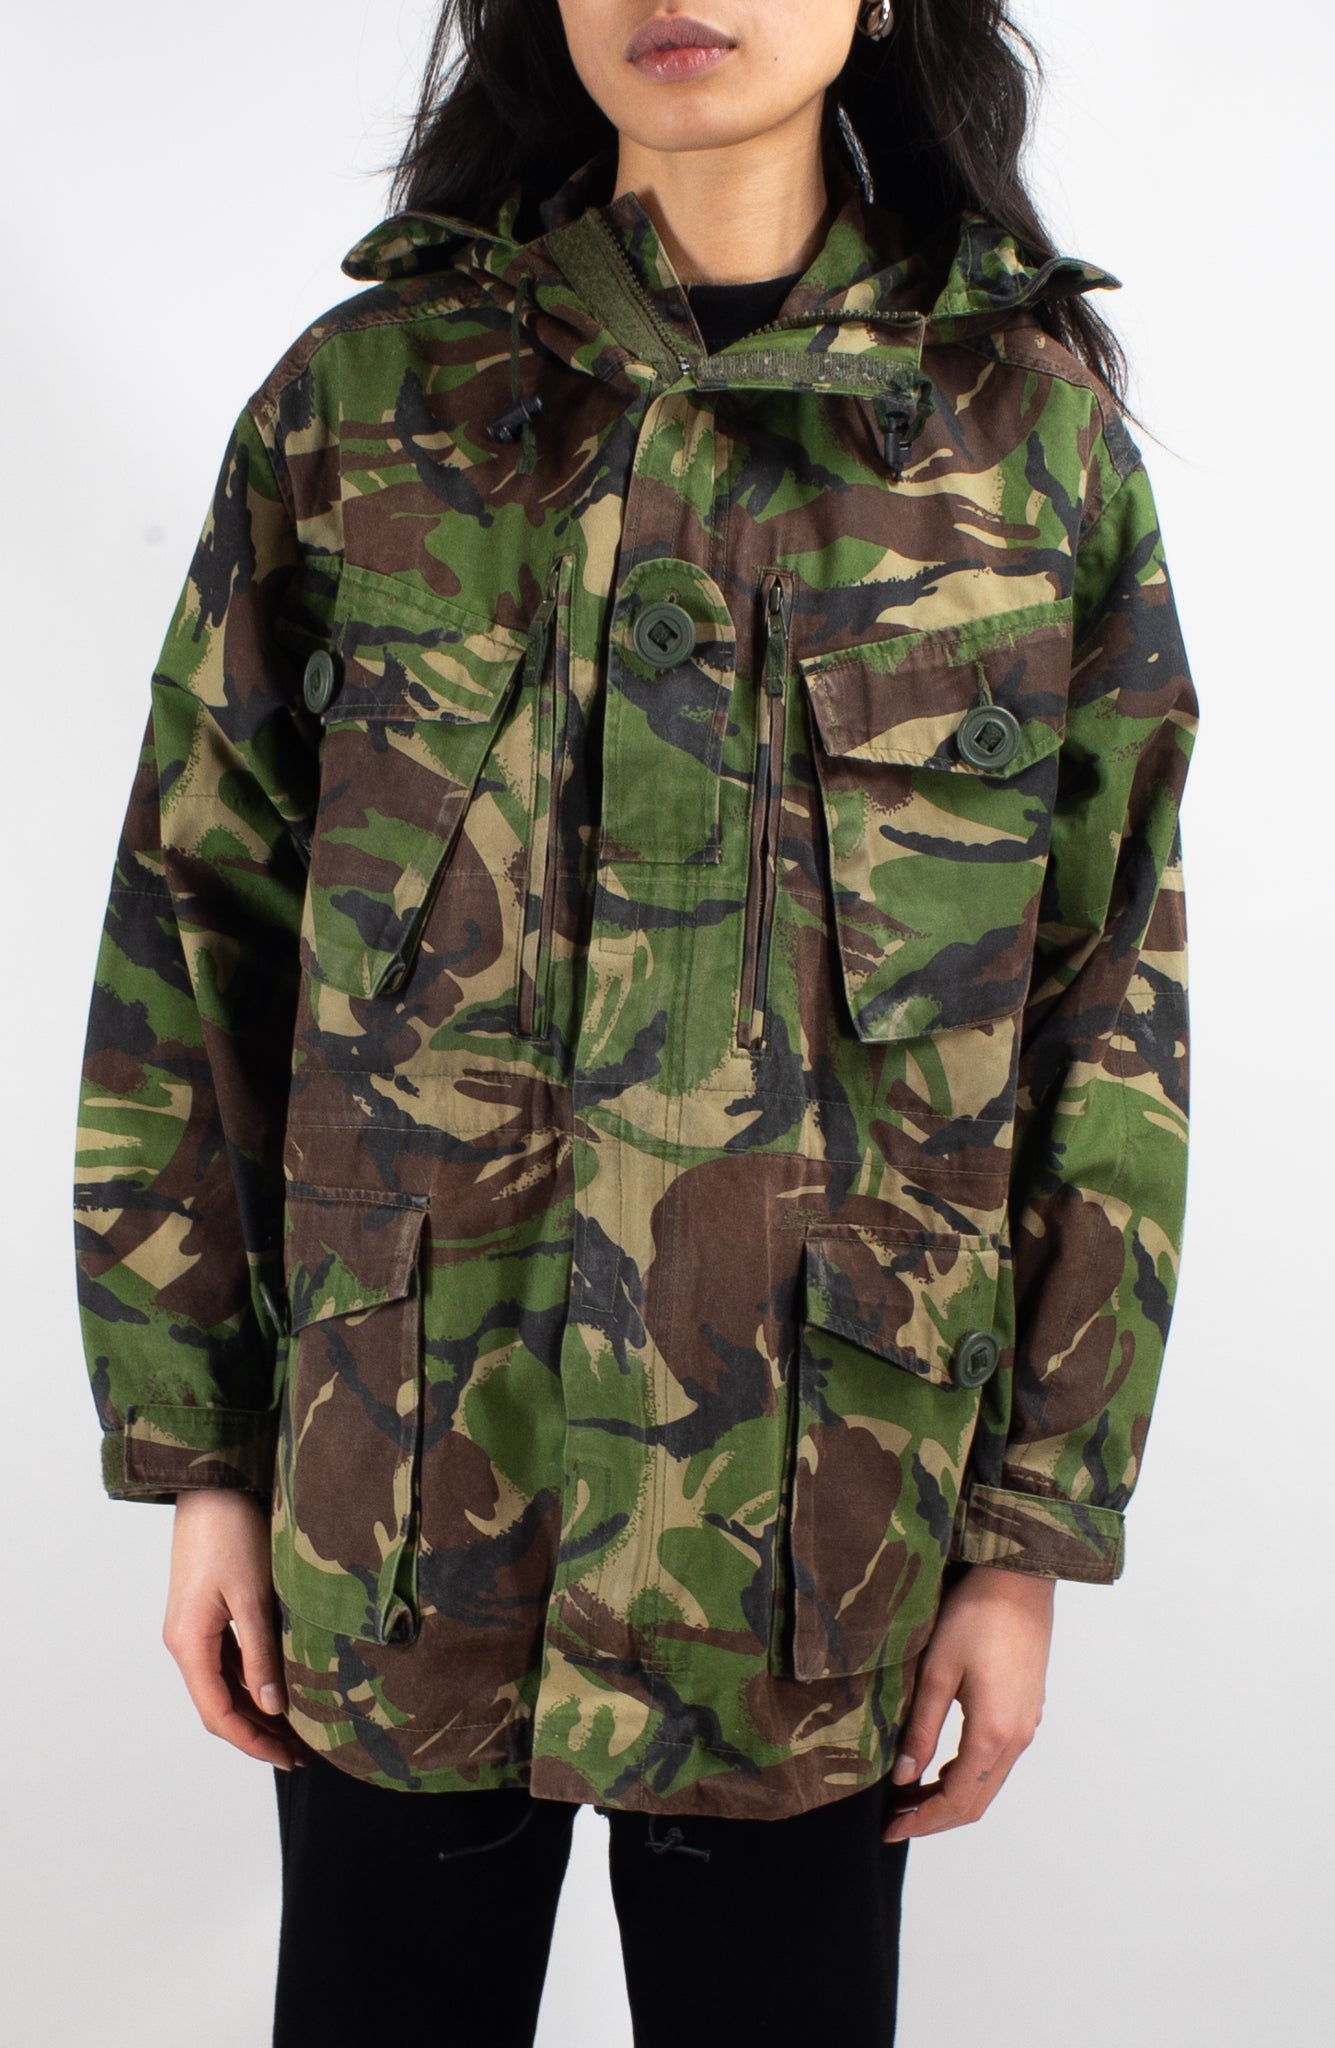 British Army Windproof Jacket - Forces Uniform and Kit